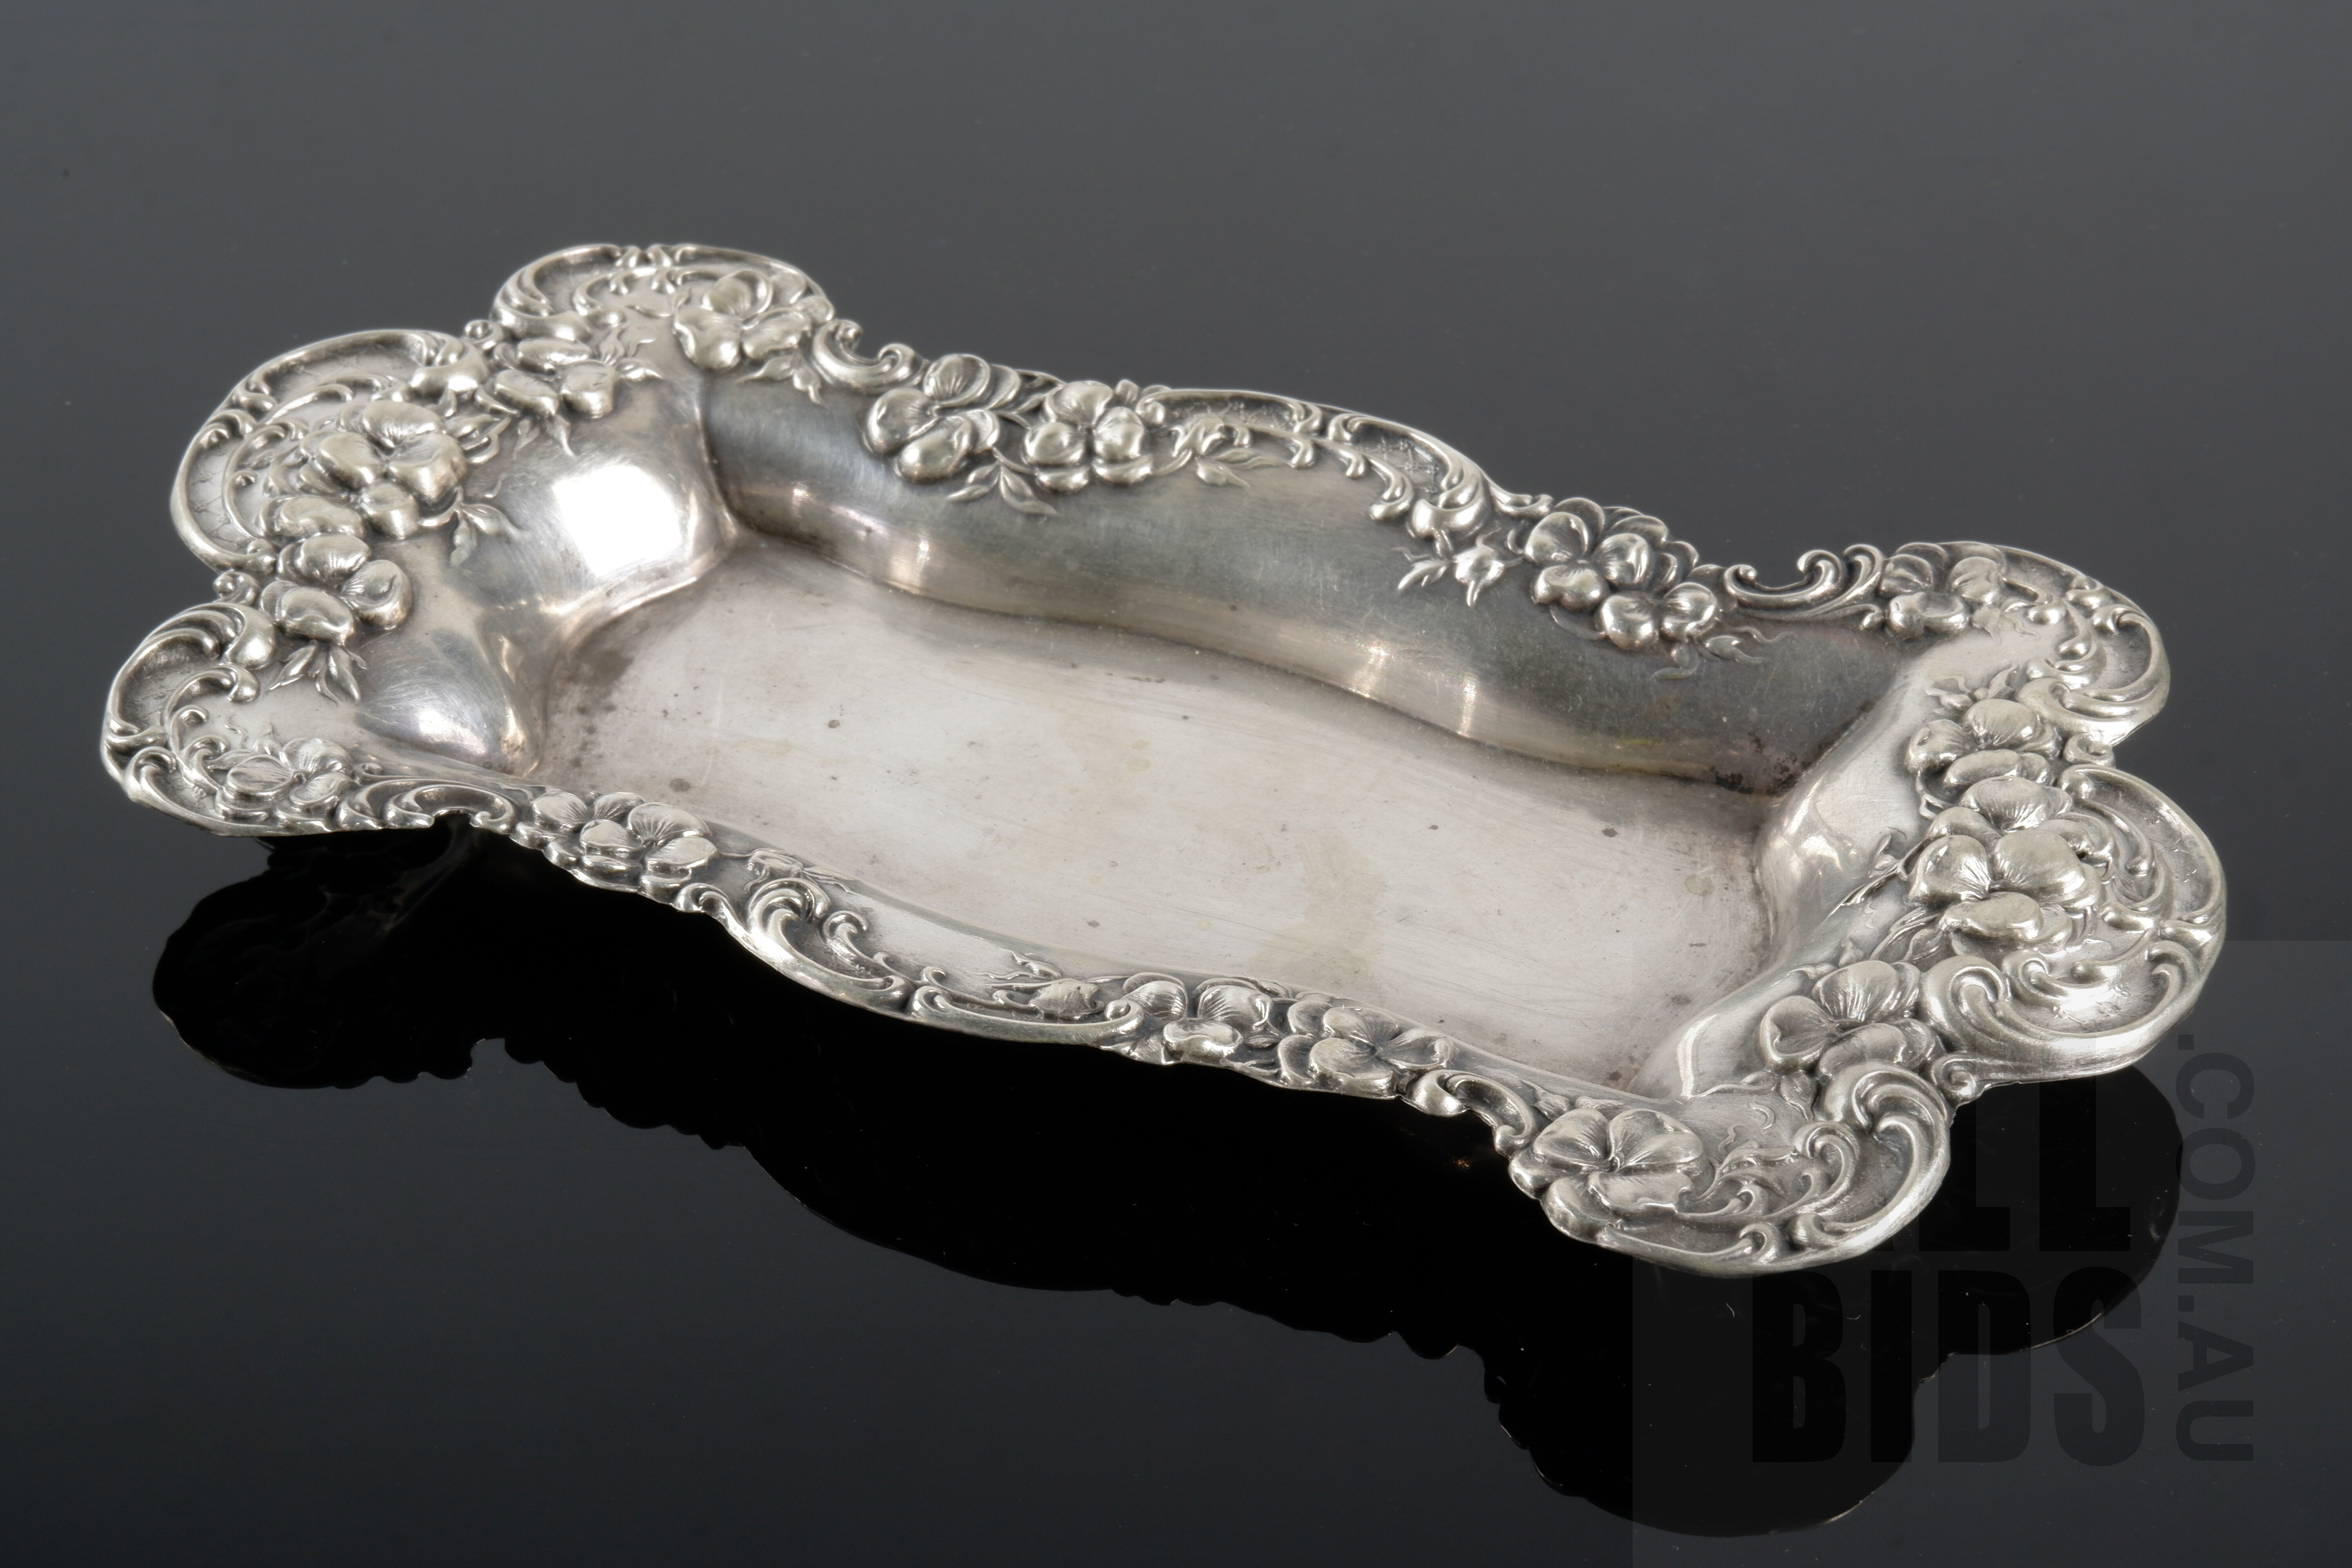 'American Sterling Silver Art Nouveau Tray, Marked Alvin Sterling, 64g'